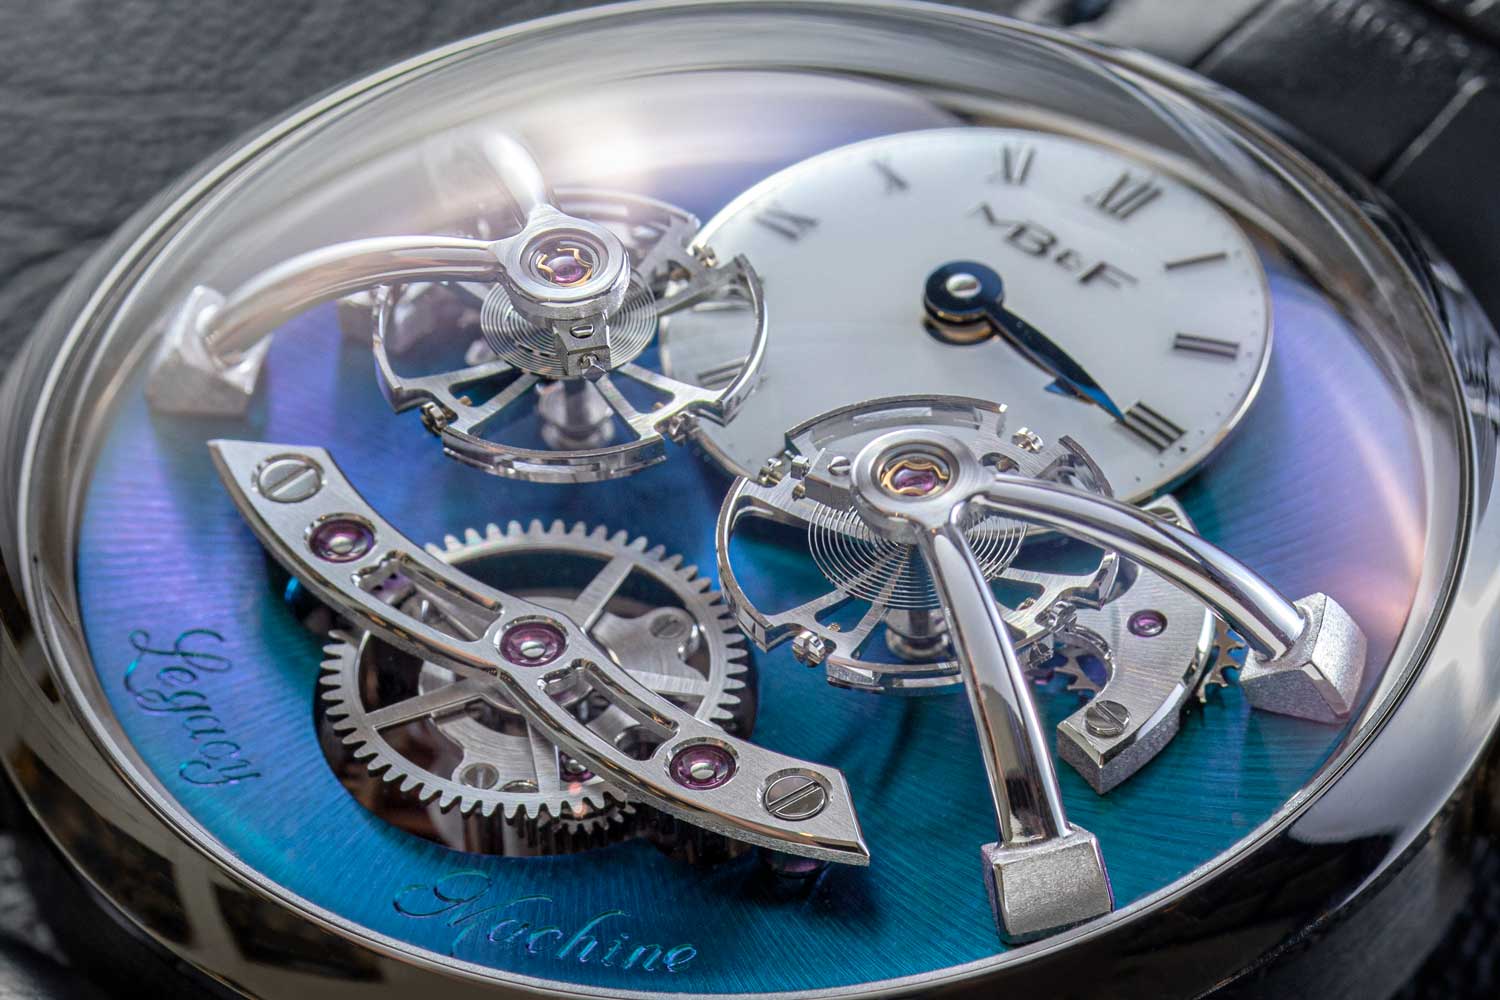 The LM2 has not just one but two bespoke 11mm balance wheels flying above the movement and dials (©Revolution)